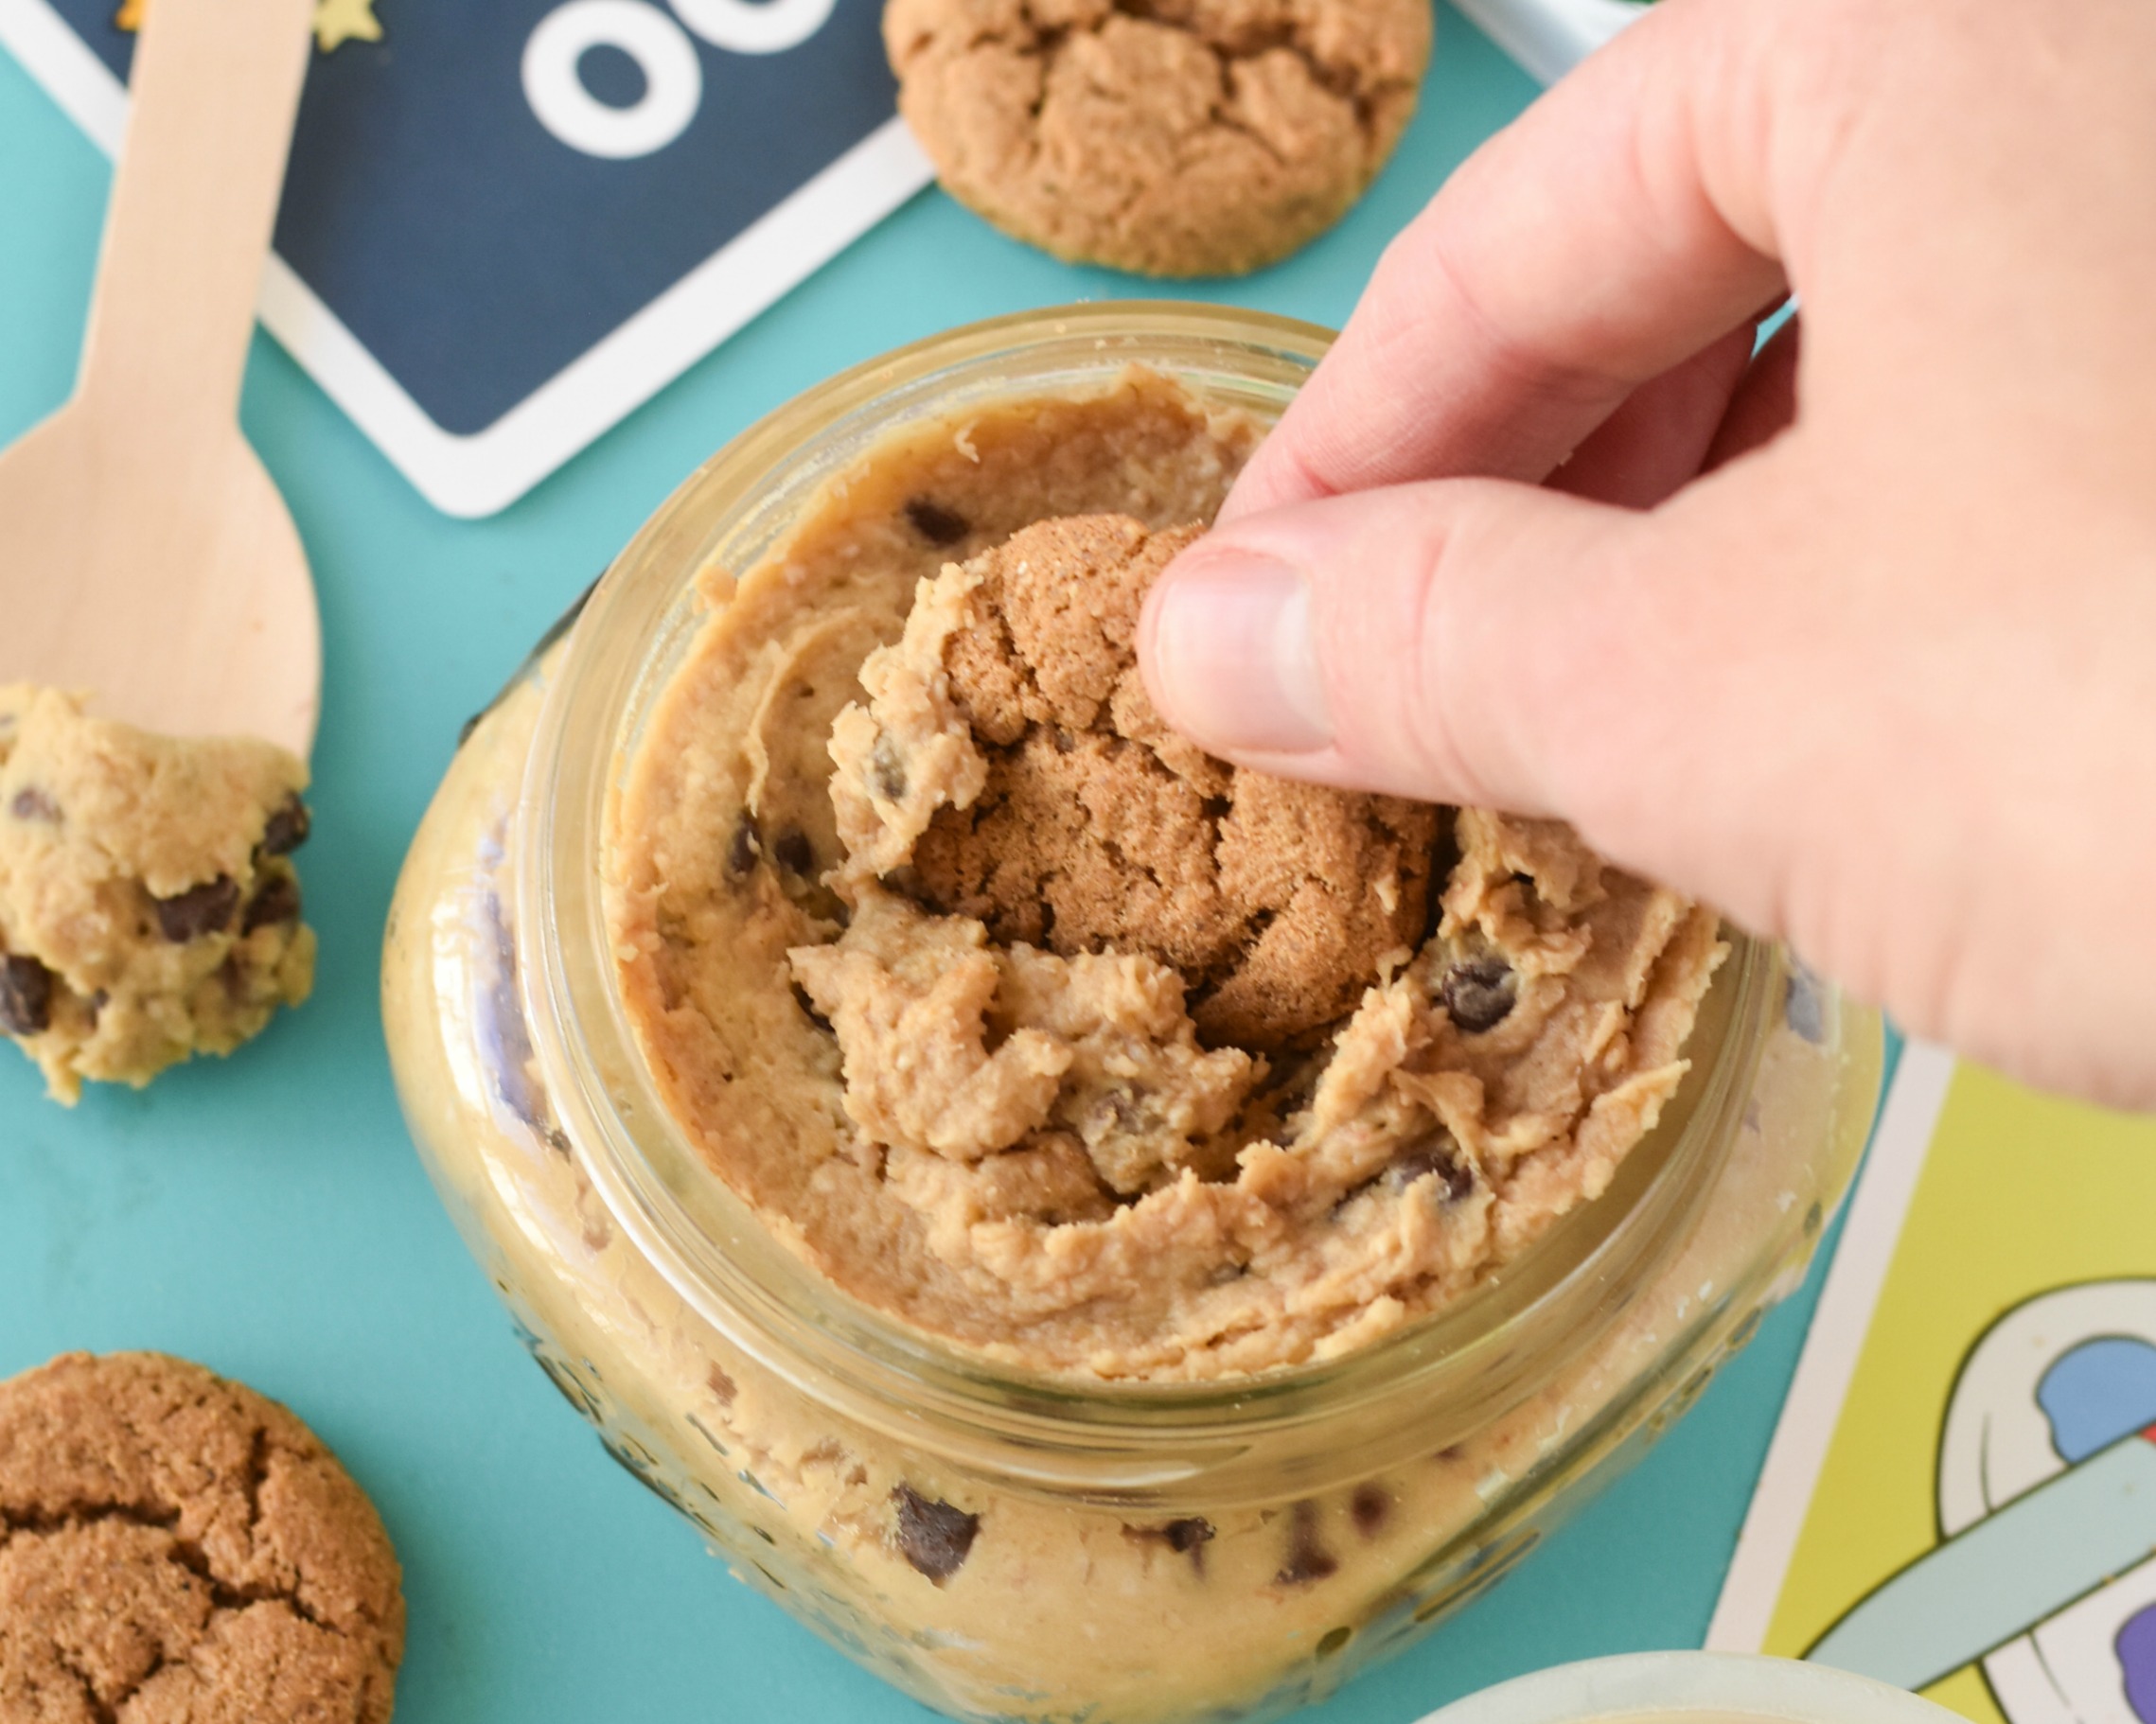 Handing dipping into a jar of cookie dough hummus